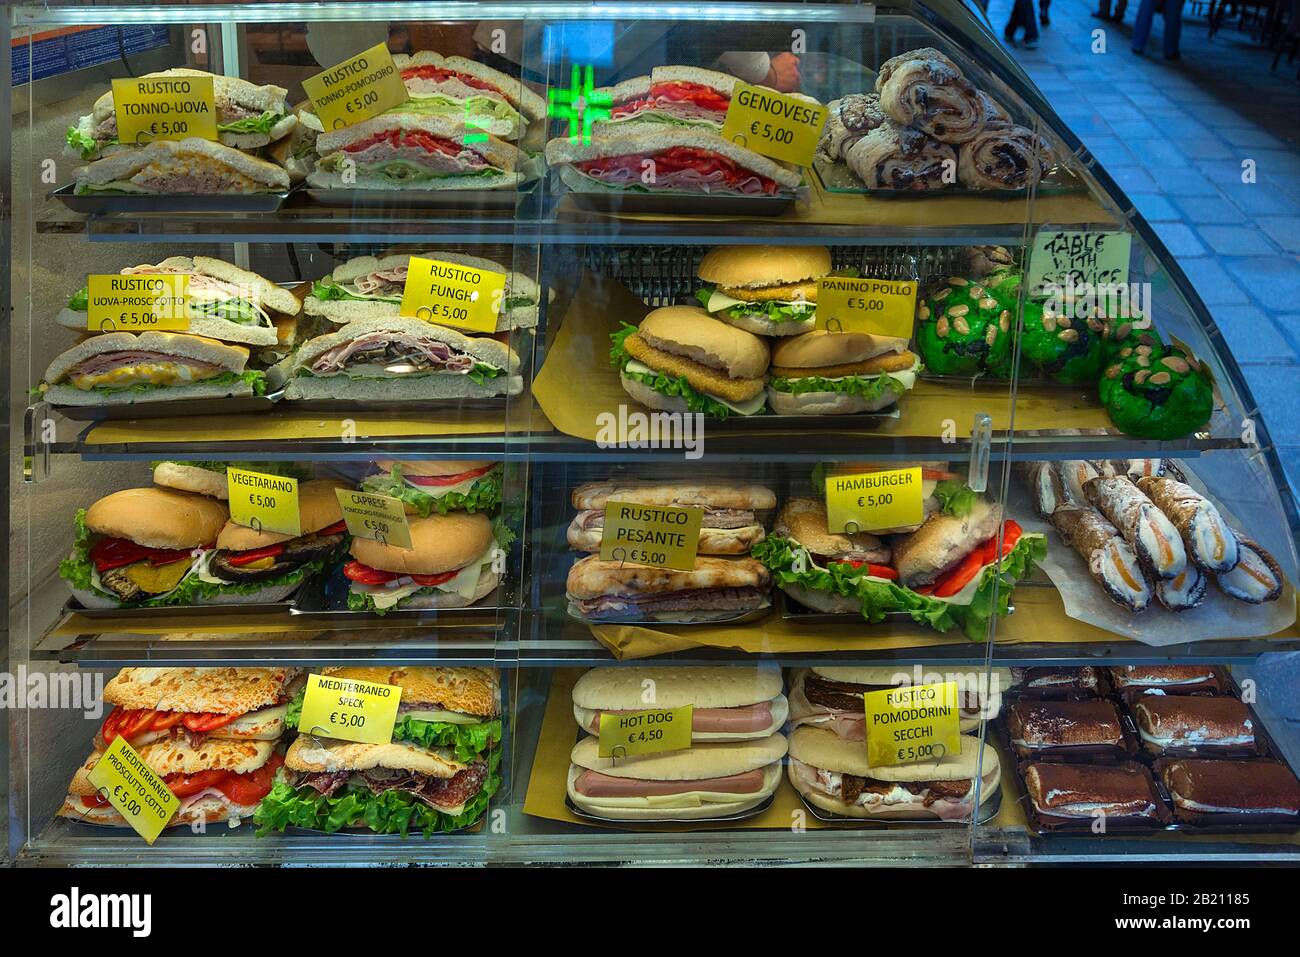 https://c8.alamy.com/comp/2B21185/offer-of-various-sandwiches-in-a-refrigerated-display-case-venice-veneto-italy-2B21185.jpg